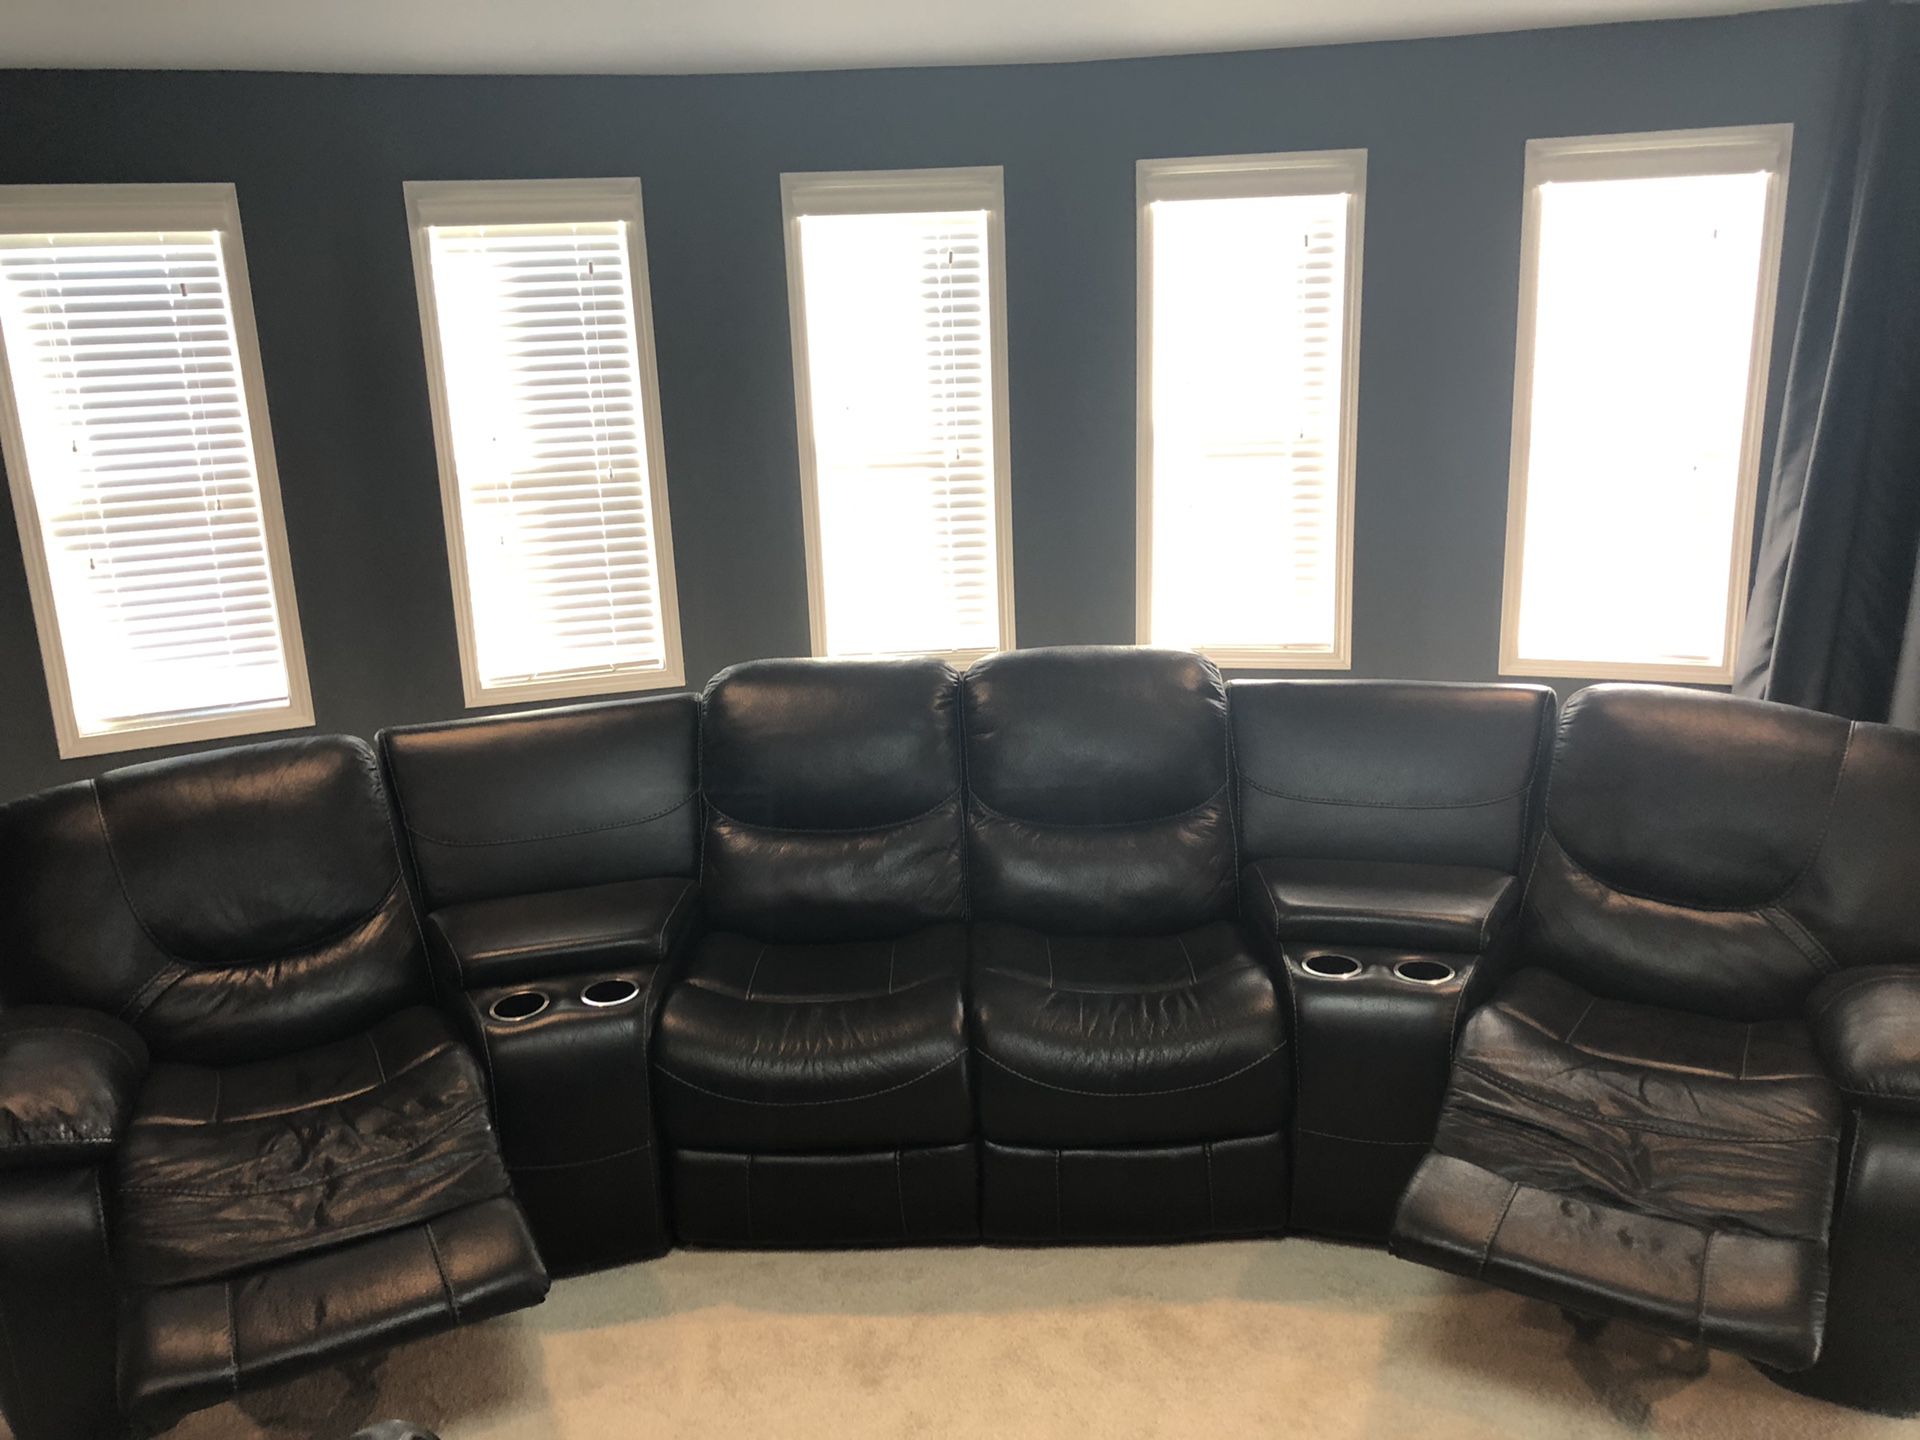 Black Leather Sectional